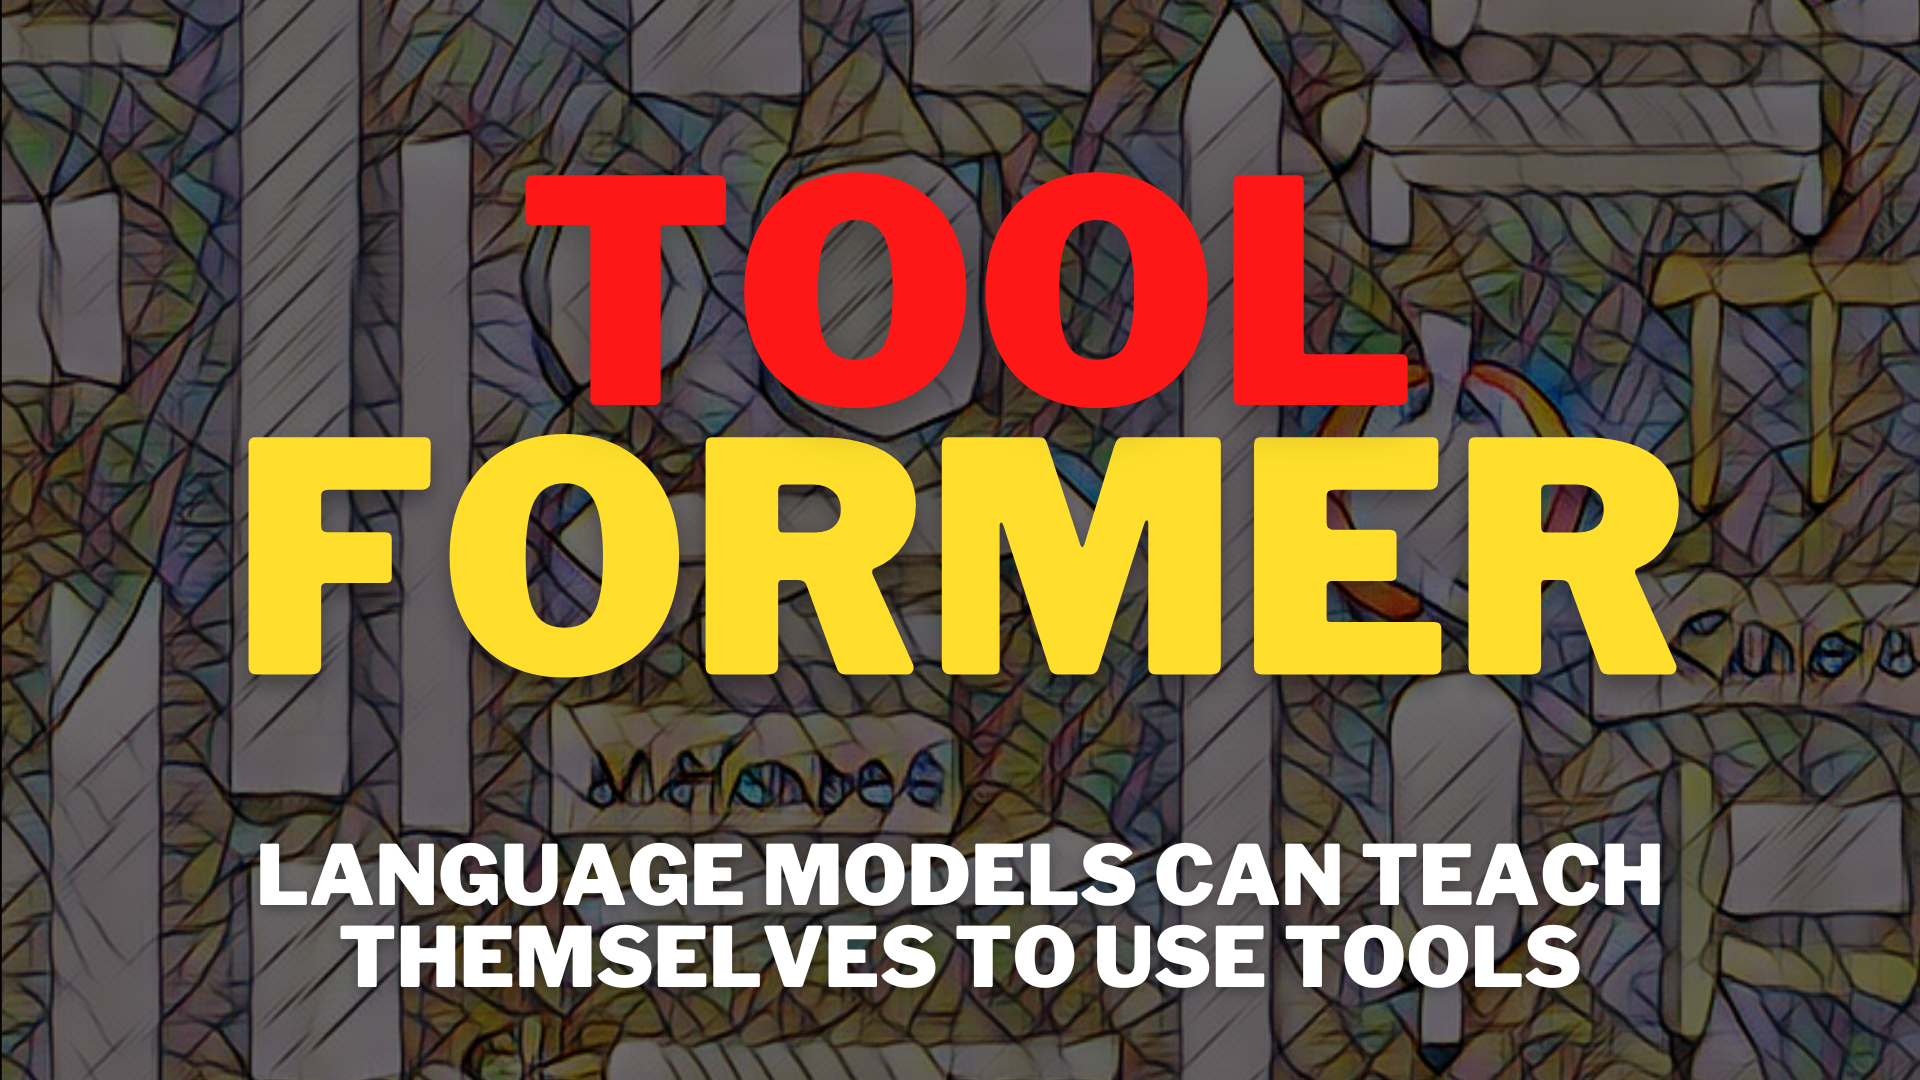 Toolformer: Language Models Can Teach Themselves to Use Tools